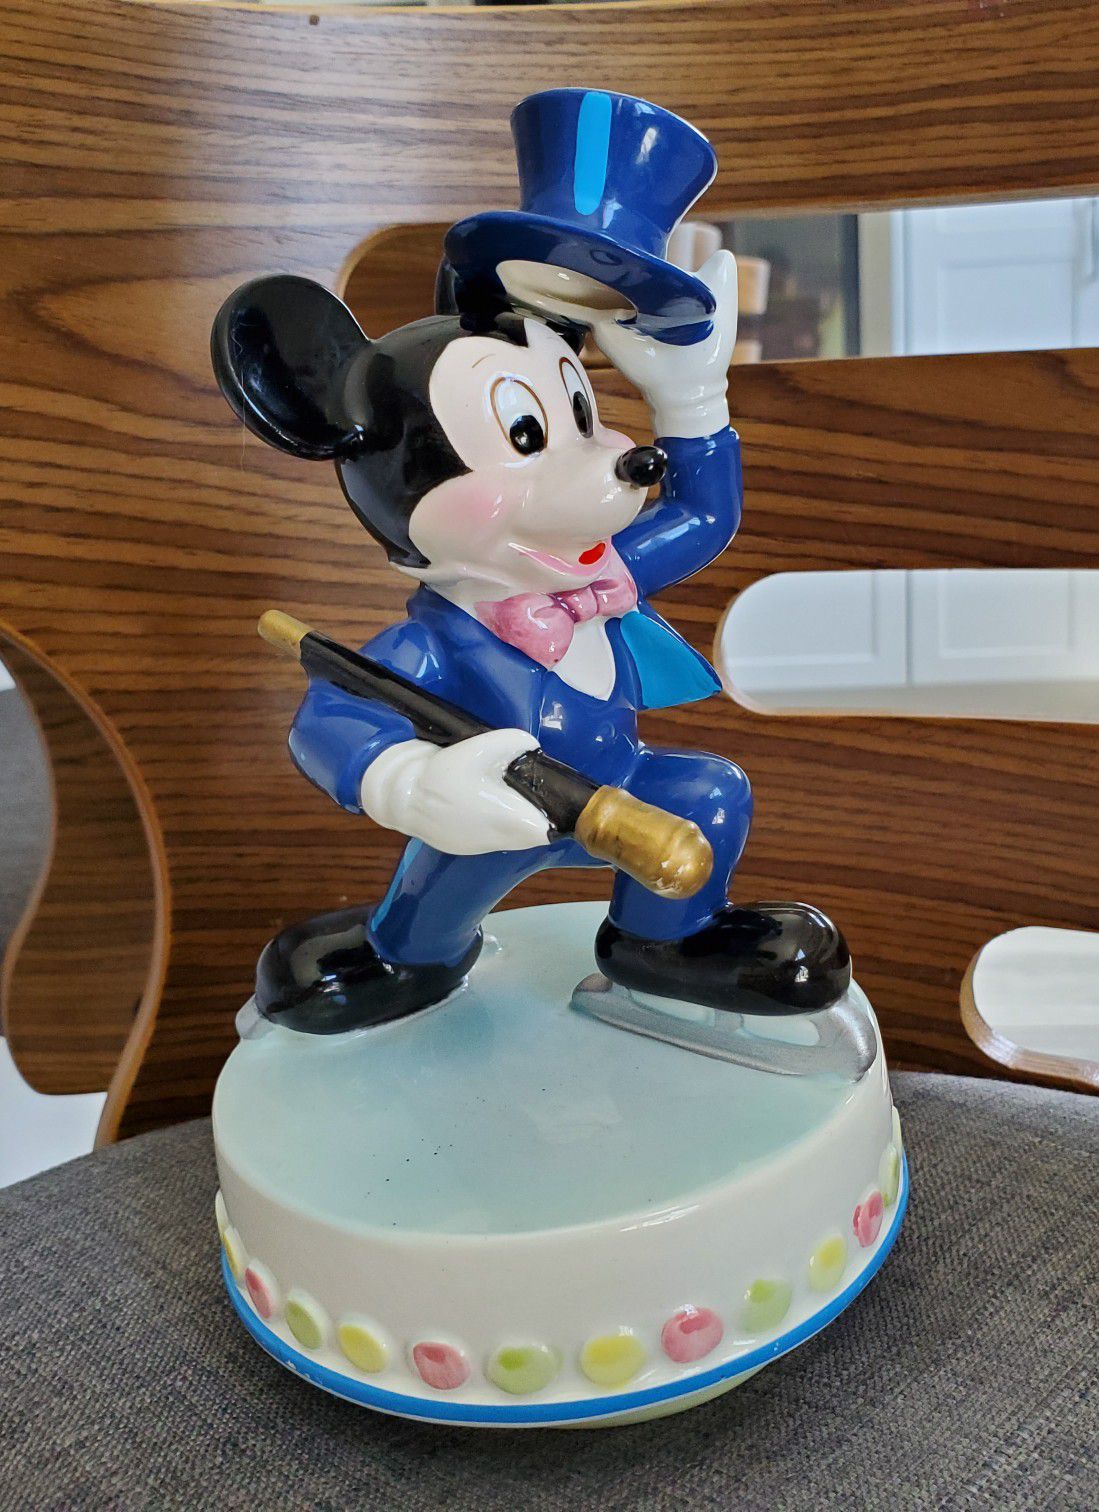 Disney Mickey Mouse Ice Skating Schmid Music Box collectible porcelain statue